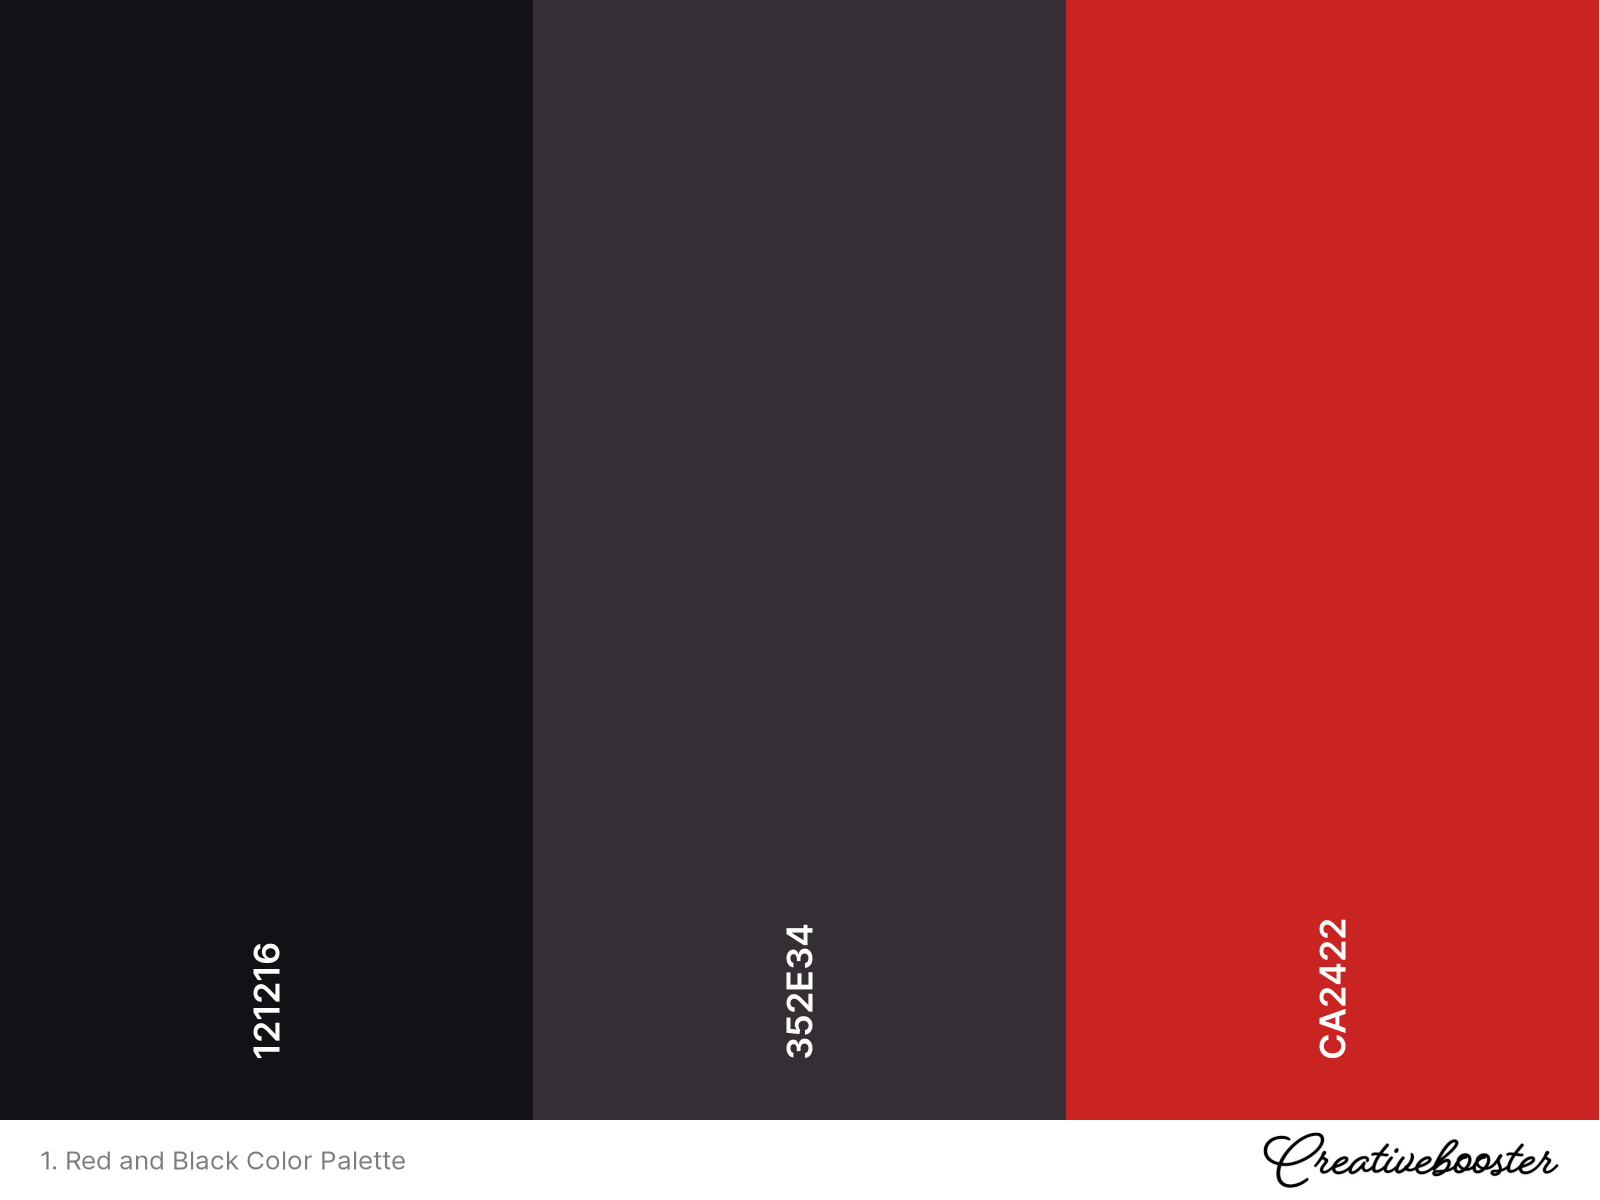 1. Red and Black Color Palette